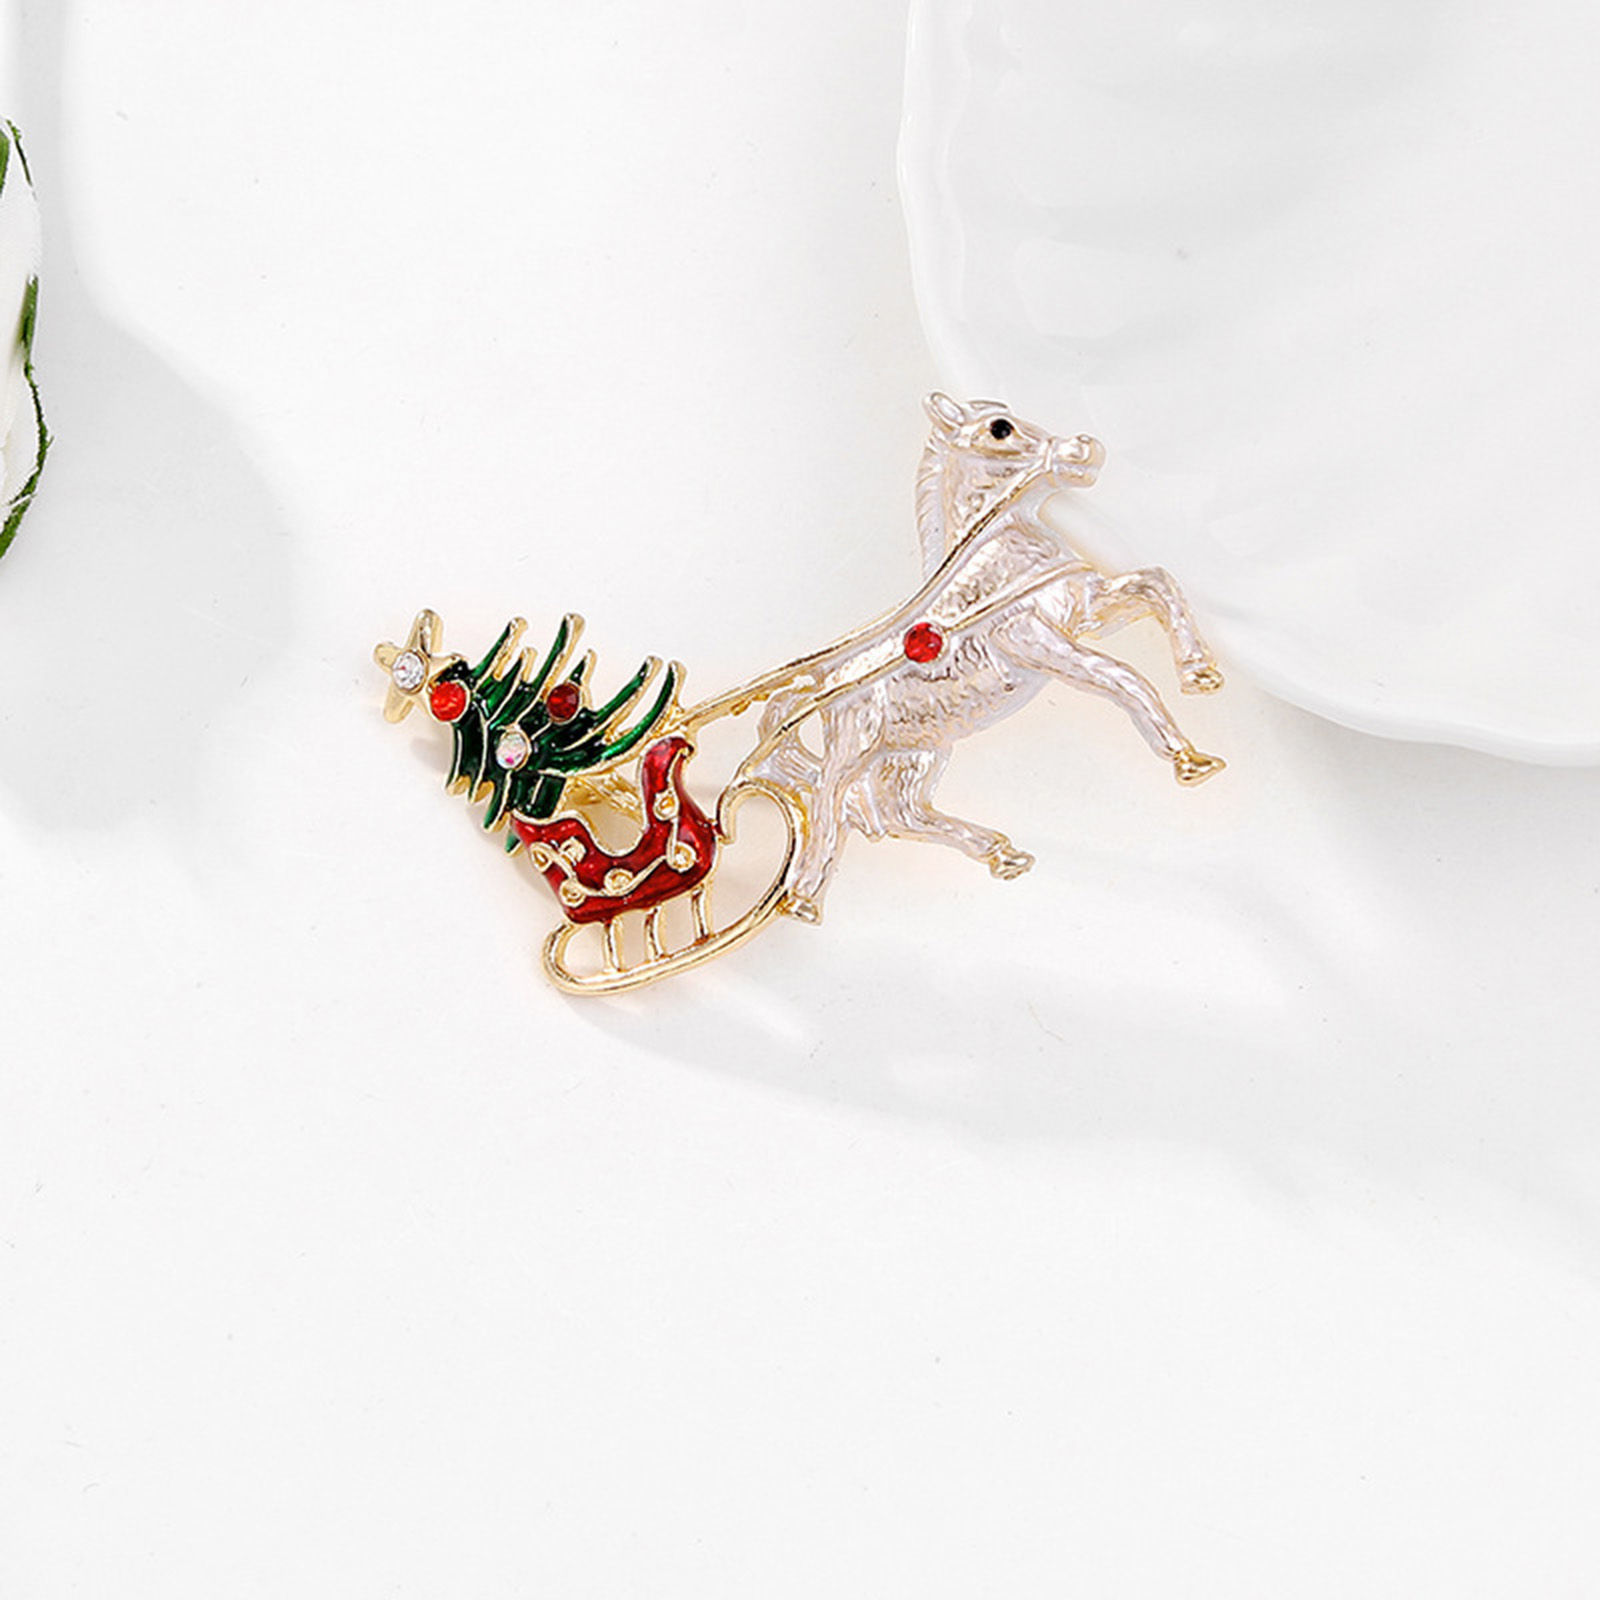 Picture of Retro Pin Brooches Carriage Christmas Tree Gold Plated White & Green Enamel Red Rhinestone 6cm x 4.2cm, 1 Piece